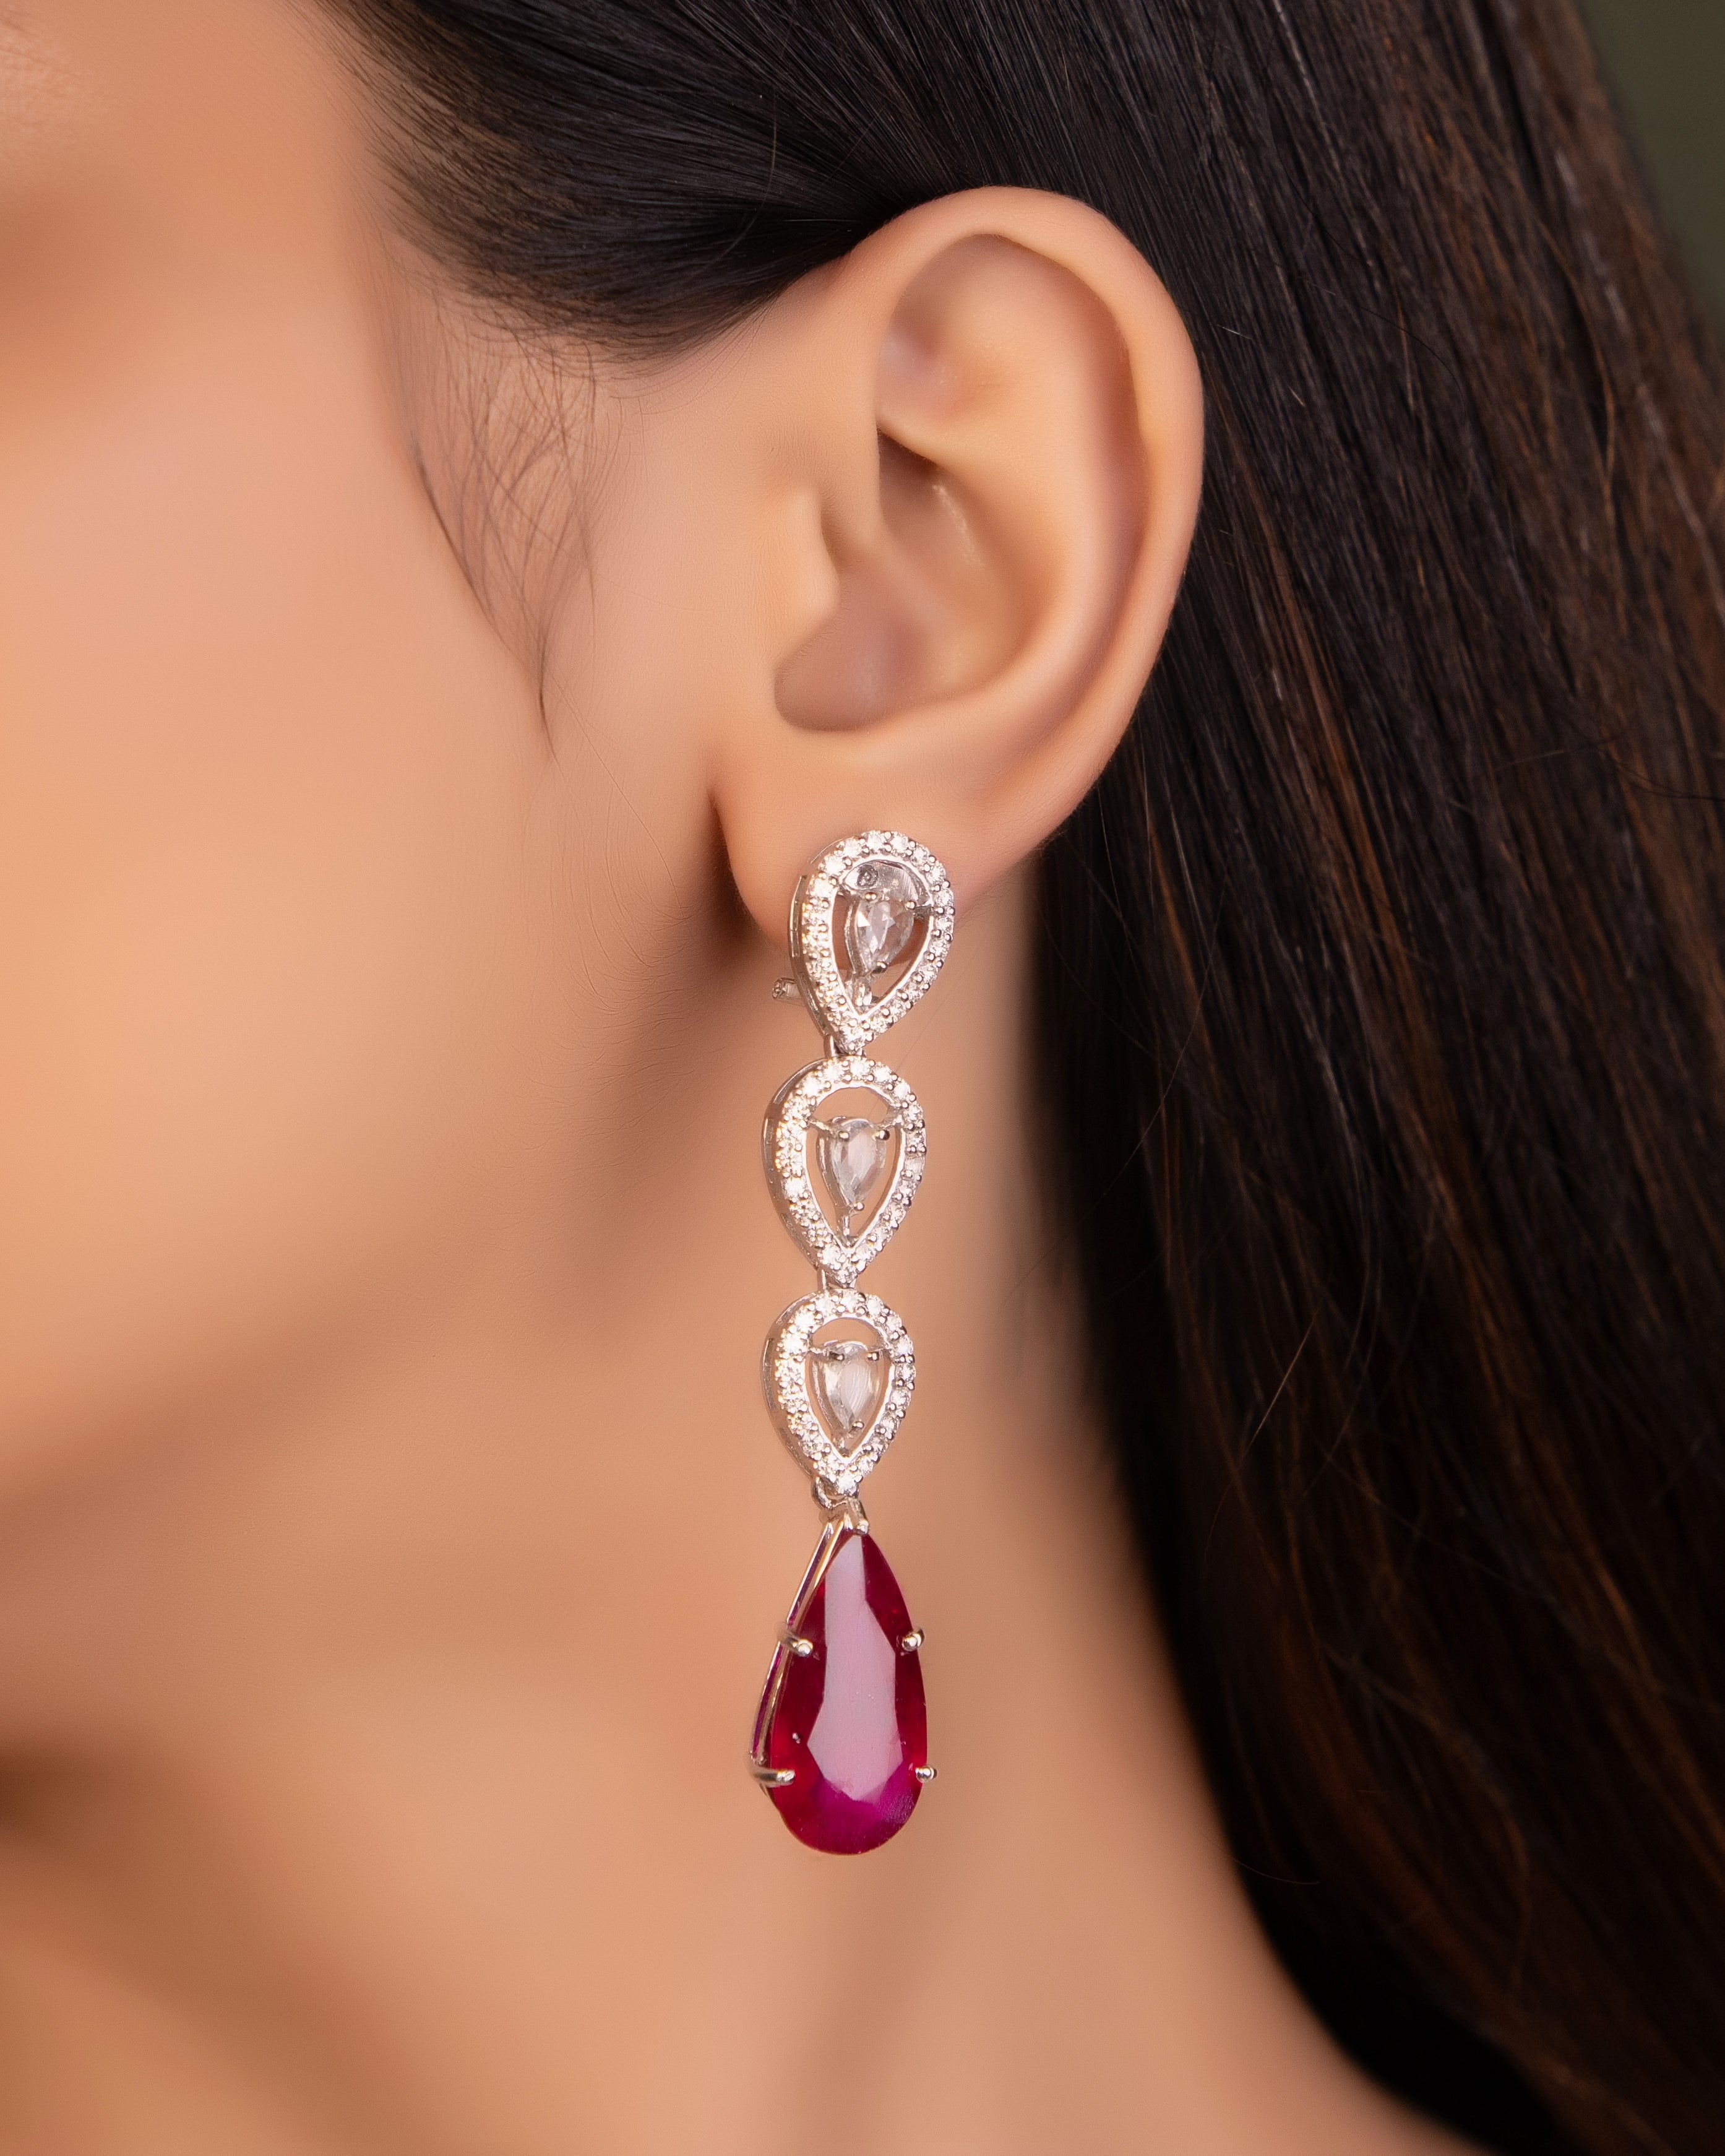 Latest Model Diamond Earrings from Manubhai - South India Jewels